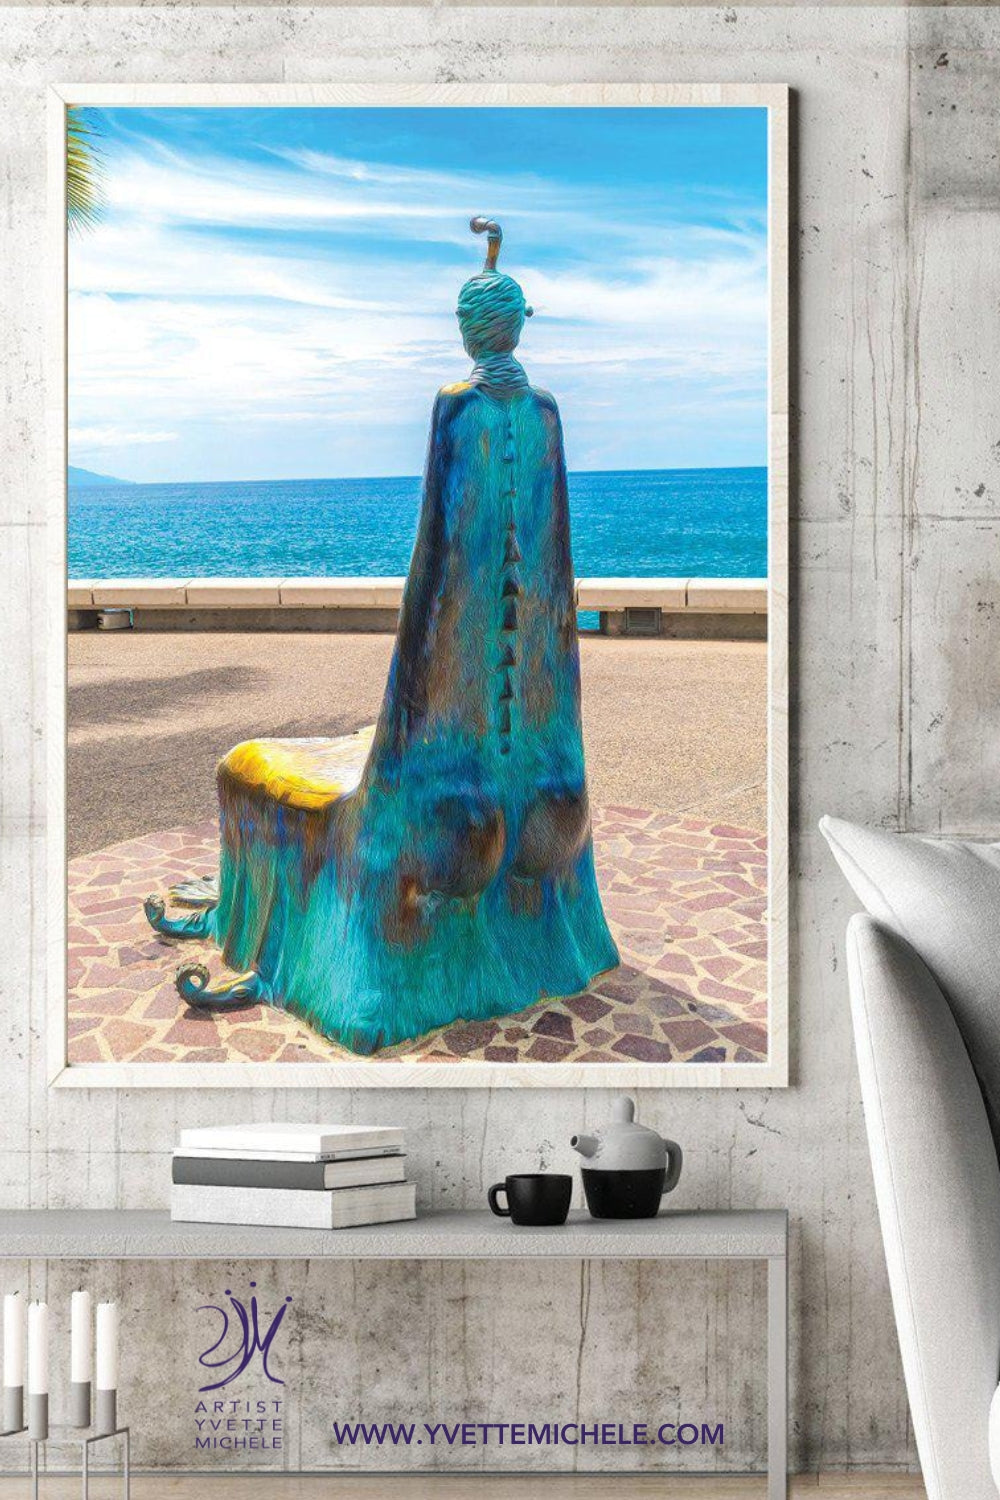 Walk On The Malecon - Decisions Single Edition Photography Print - House of Yvette Michele 